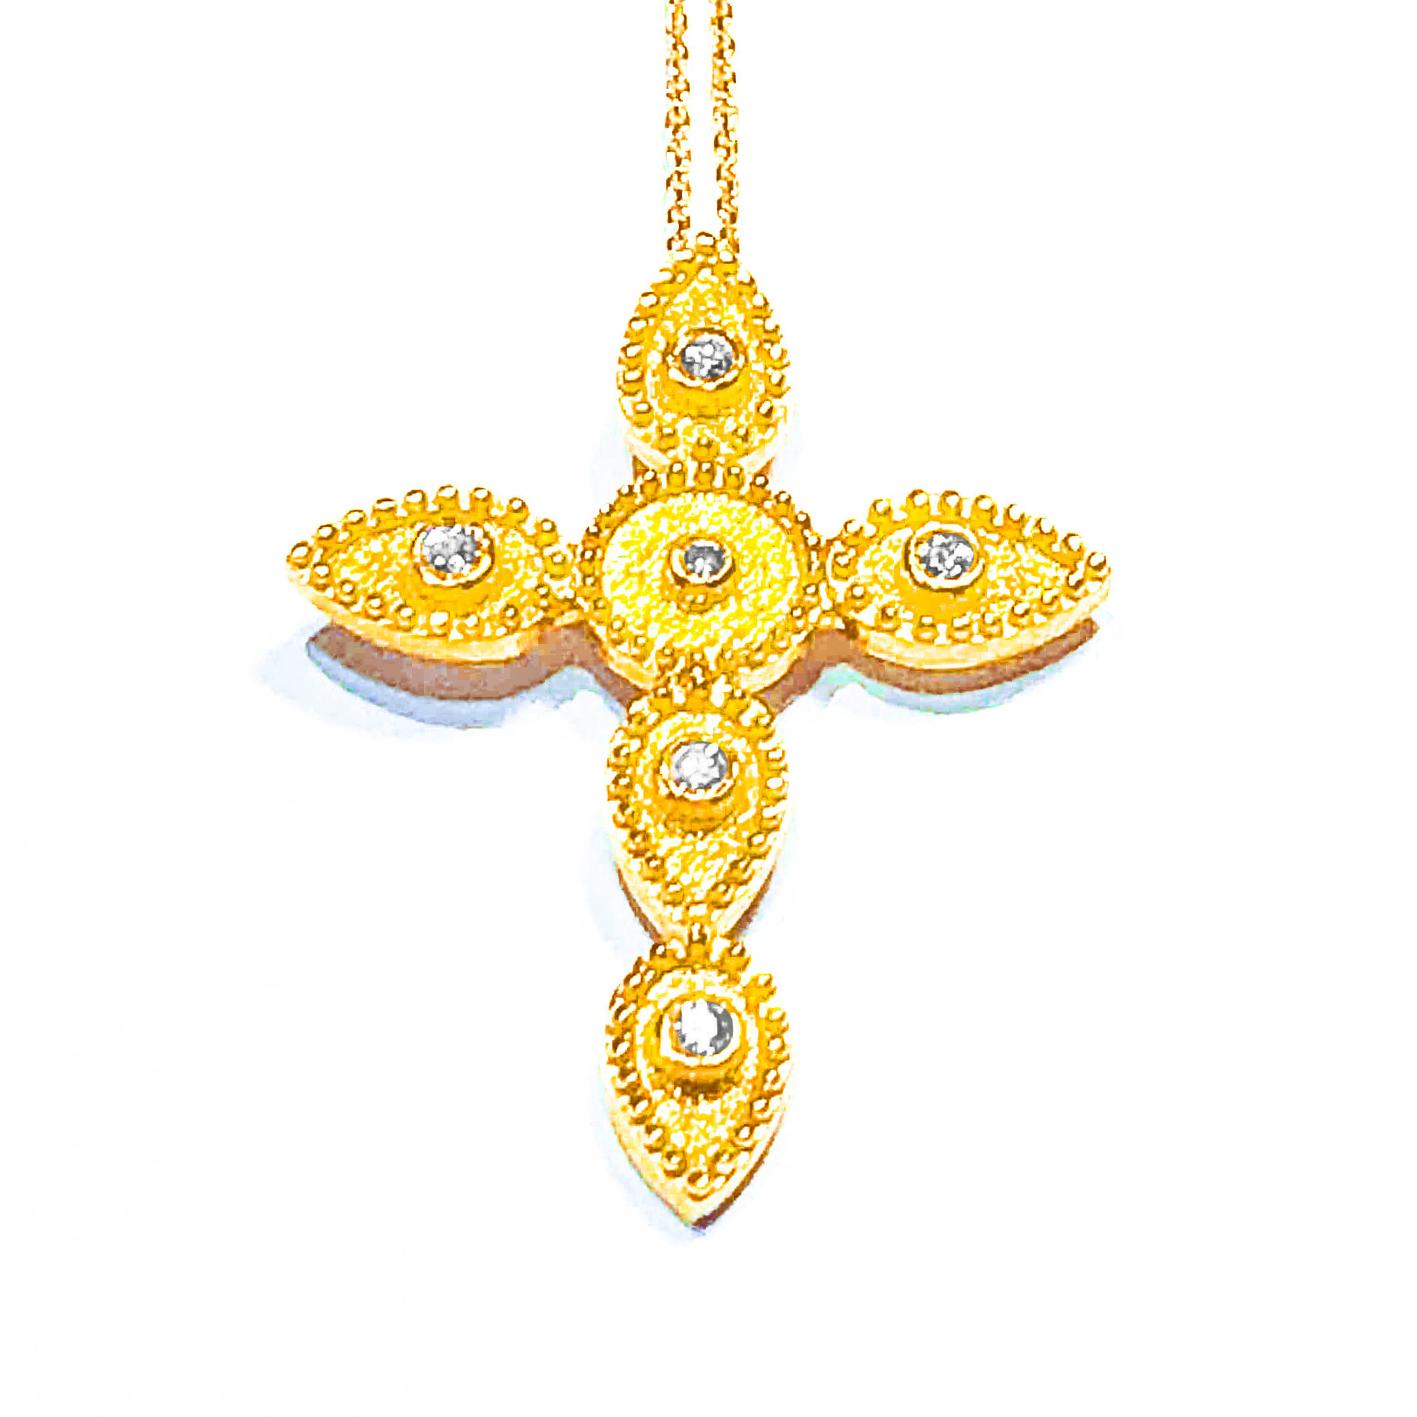 S.Georgios Cross is all handmade from solid 18 Karat Yellow Gold and is microscopically decorated with granulation work all the way around. The background of the Cross has a unique velvet look and features 6 Brilliant cut Diamonds total weight of